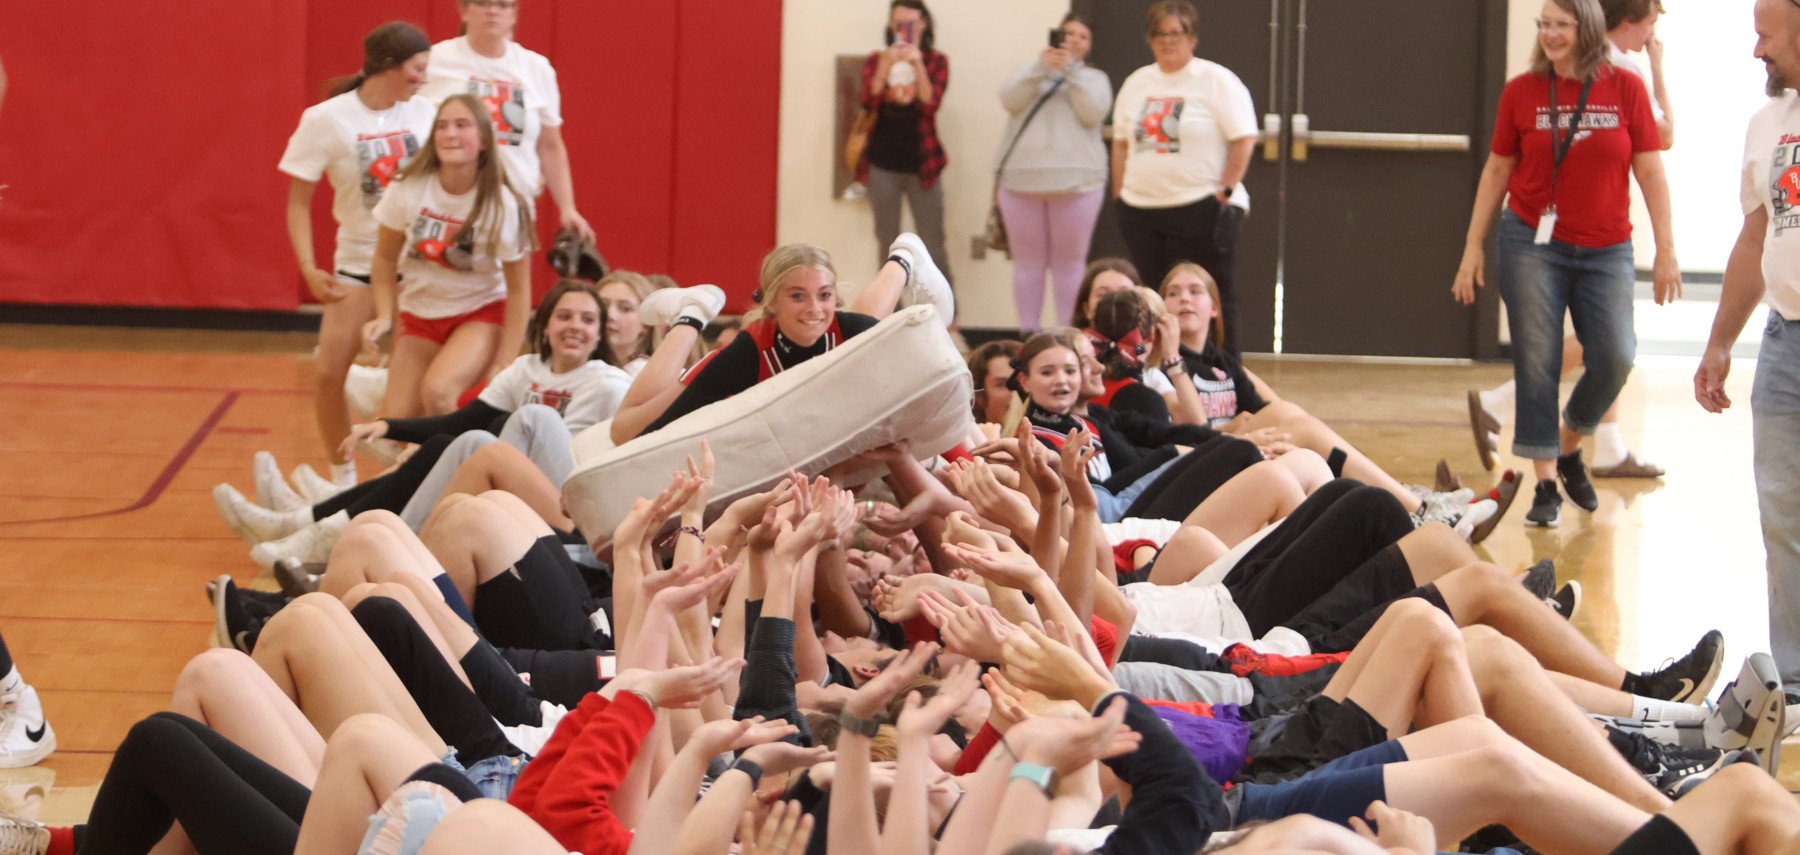 Student riding on a mattress lifted by students at pep fest.